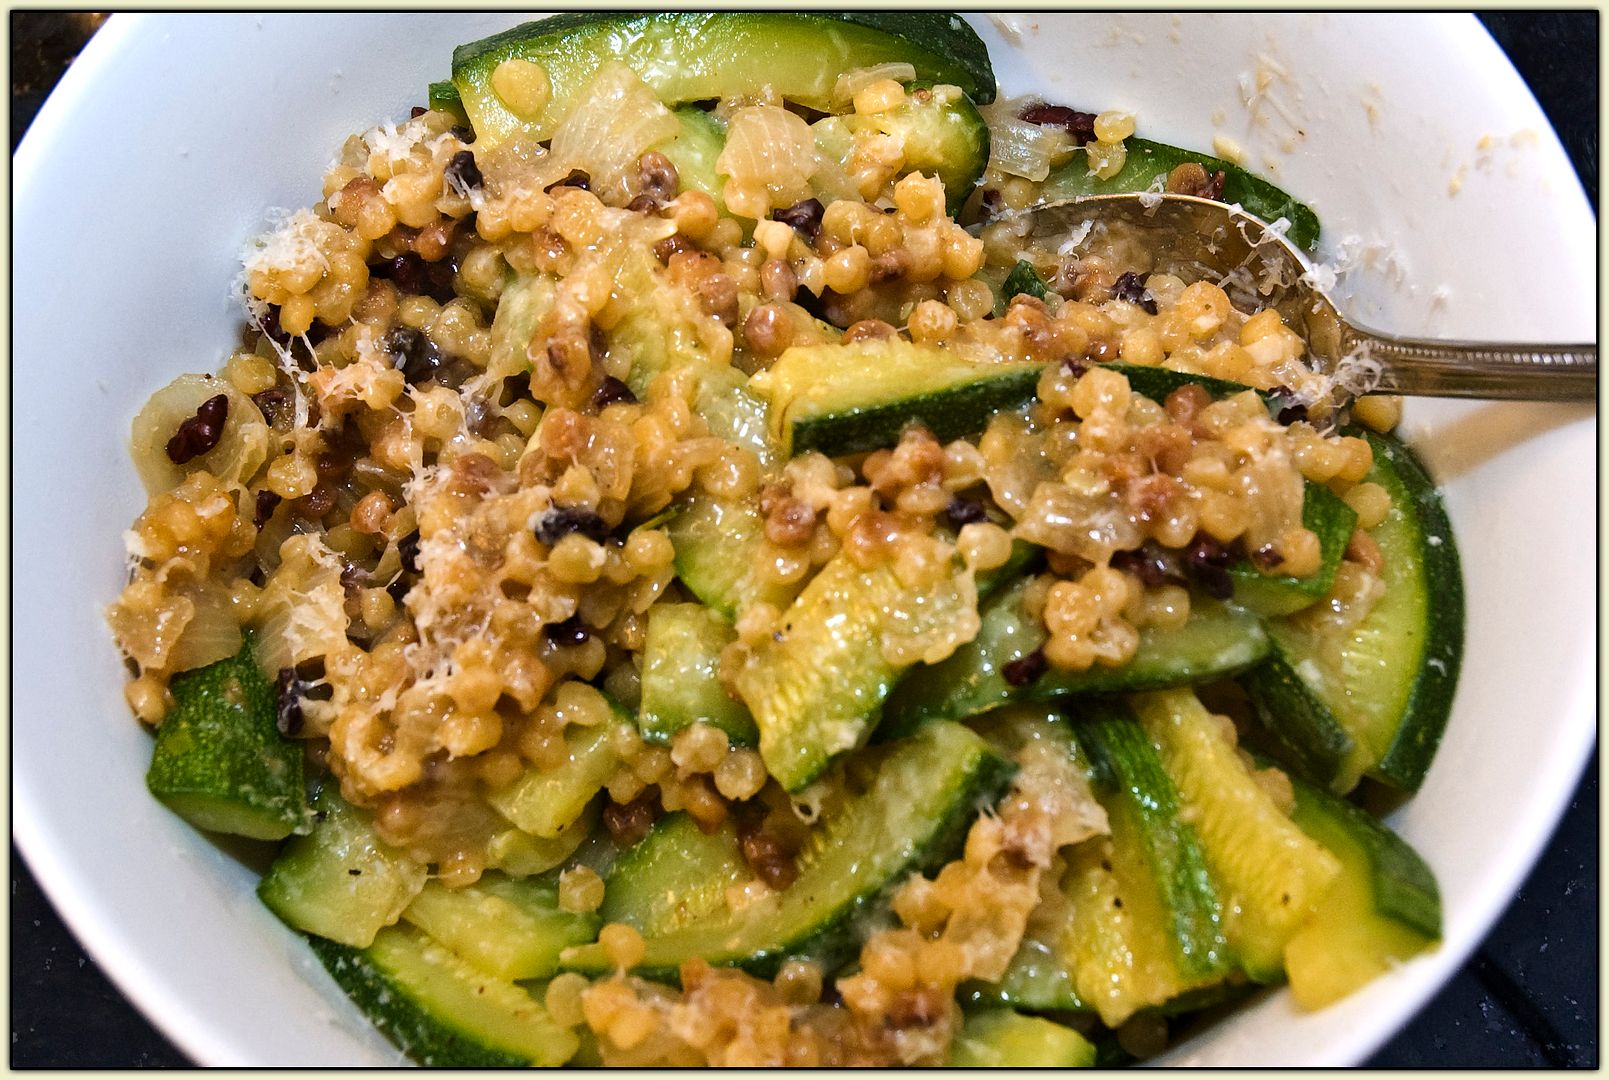 Fregola with Zucchini and Cacao